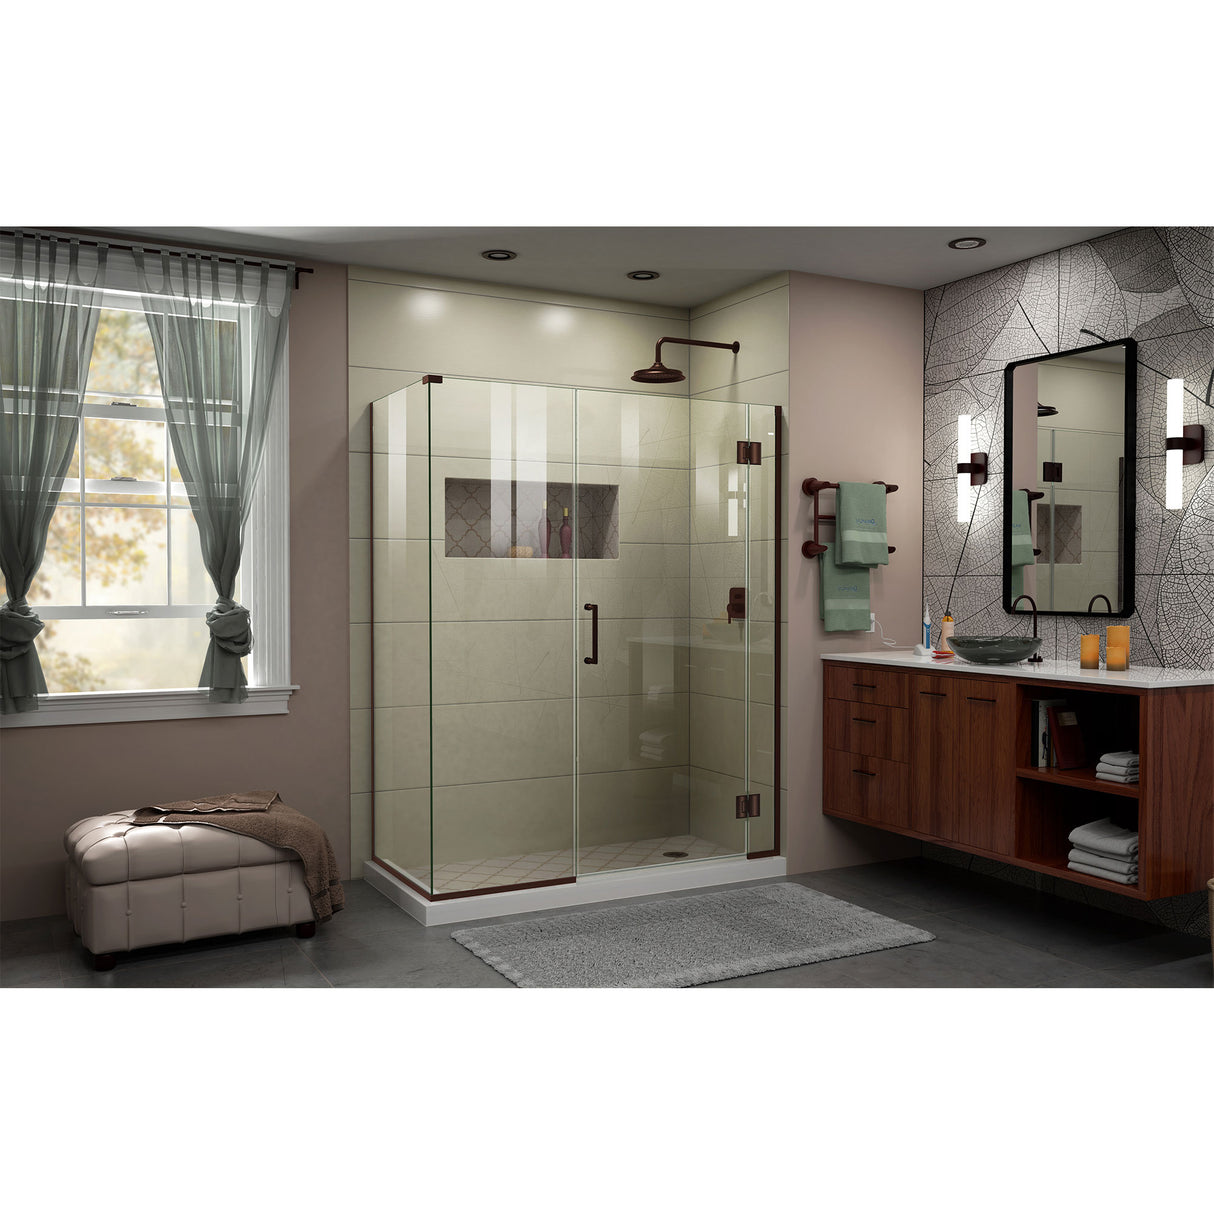 DreamLine Unidoor-X 46 in. W x 30 3/8 in. D x 72 in. H Frameless Hinged Shower Enclosure in Oil Rubbed Bronze